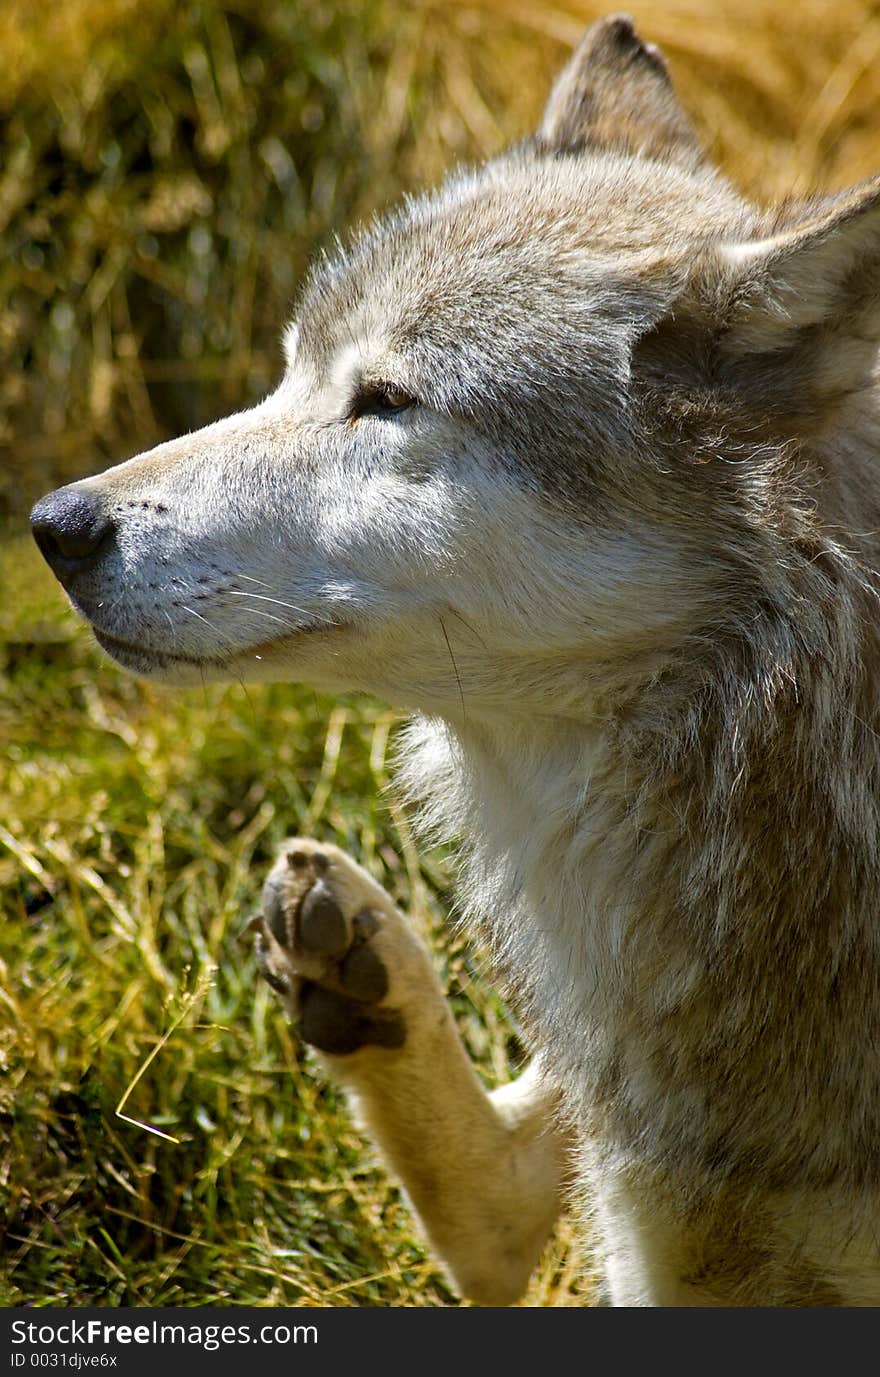 Itchy Timber wolf (canis lupus) raises leg to scratch